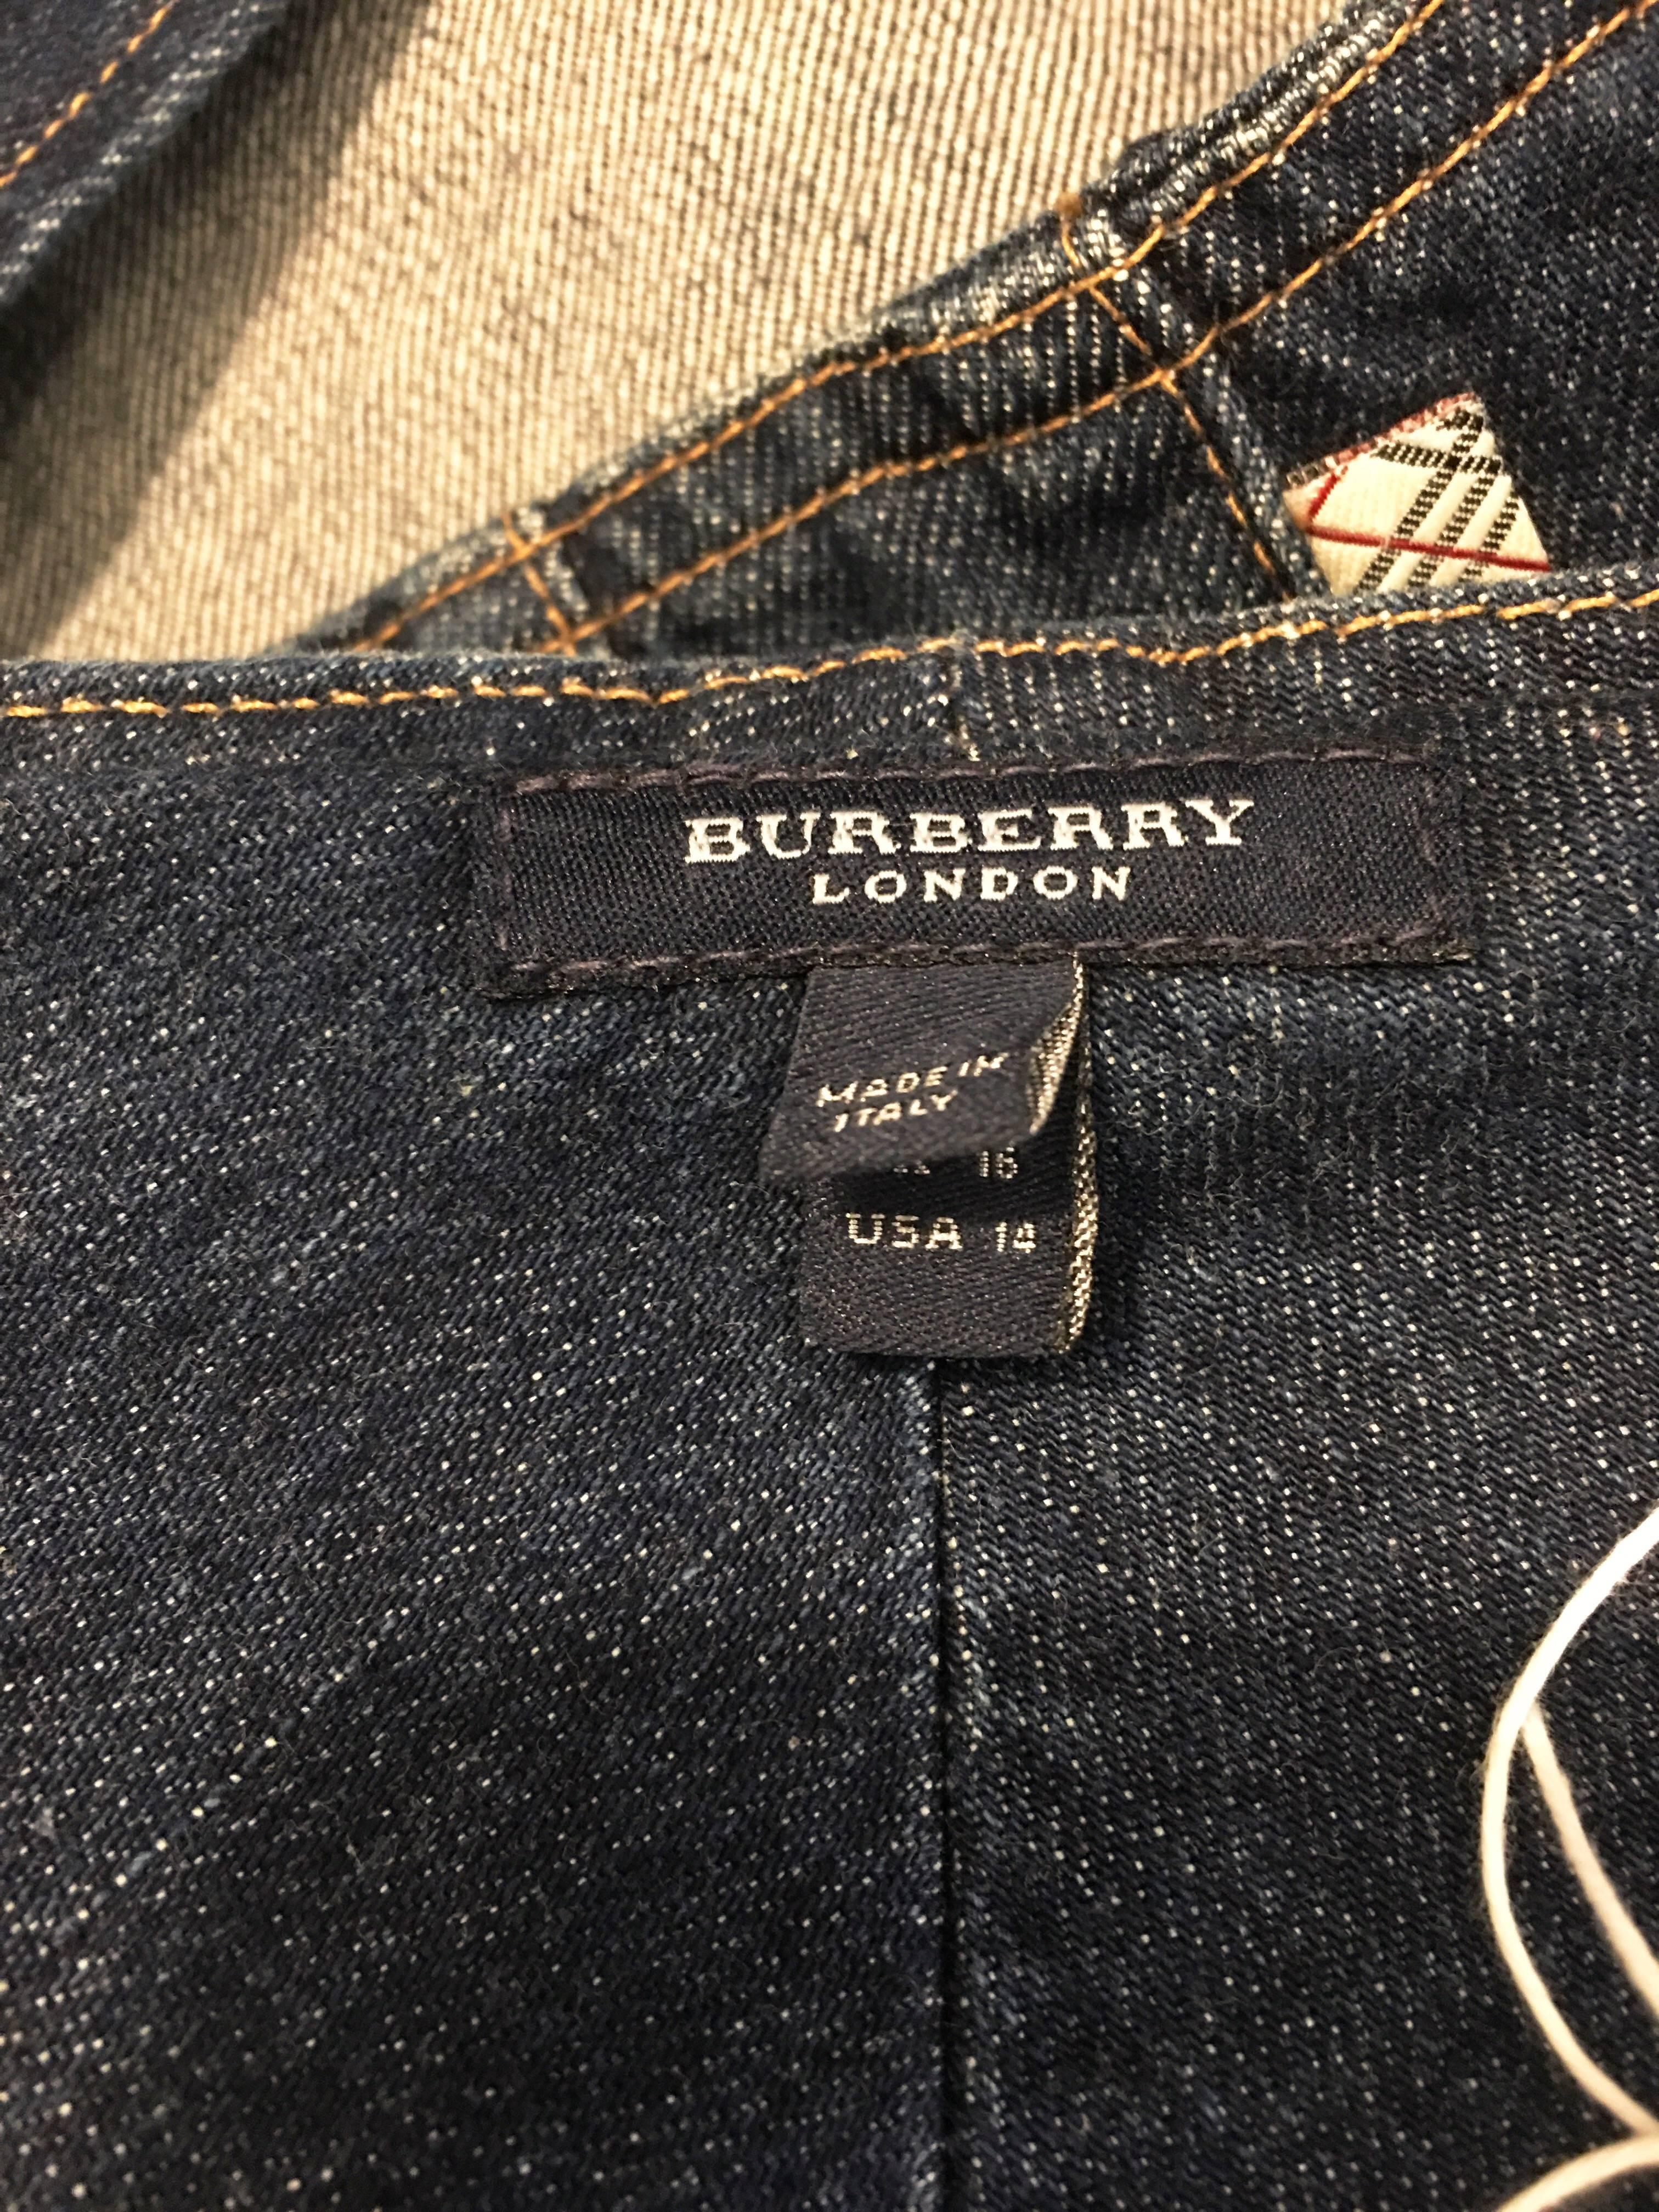 Burberry Denim and Leather Skirt For Sale 1